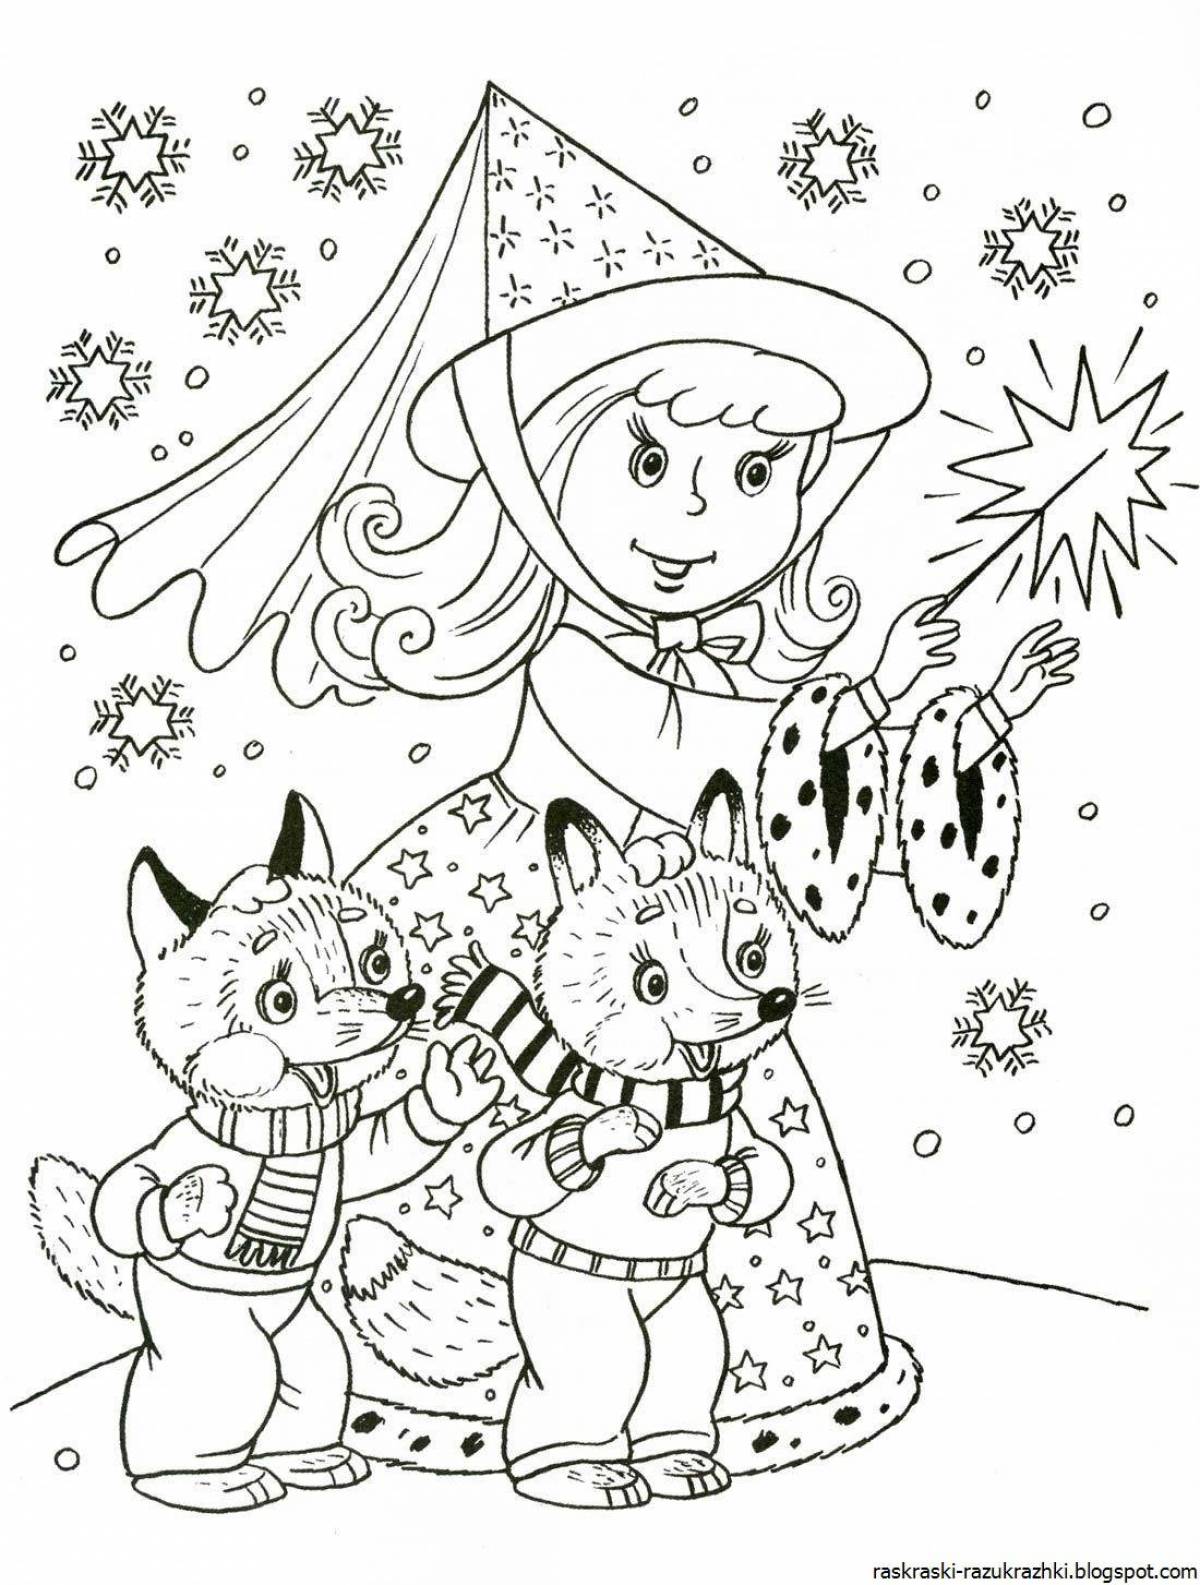 Violent coloring winter for children 10 years old